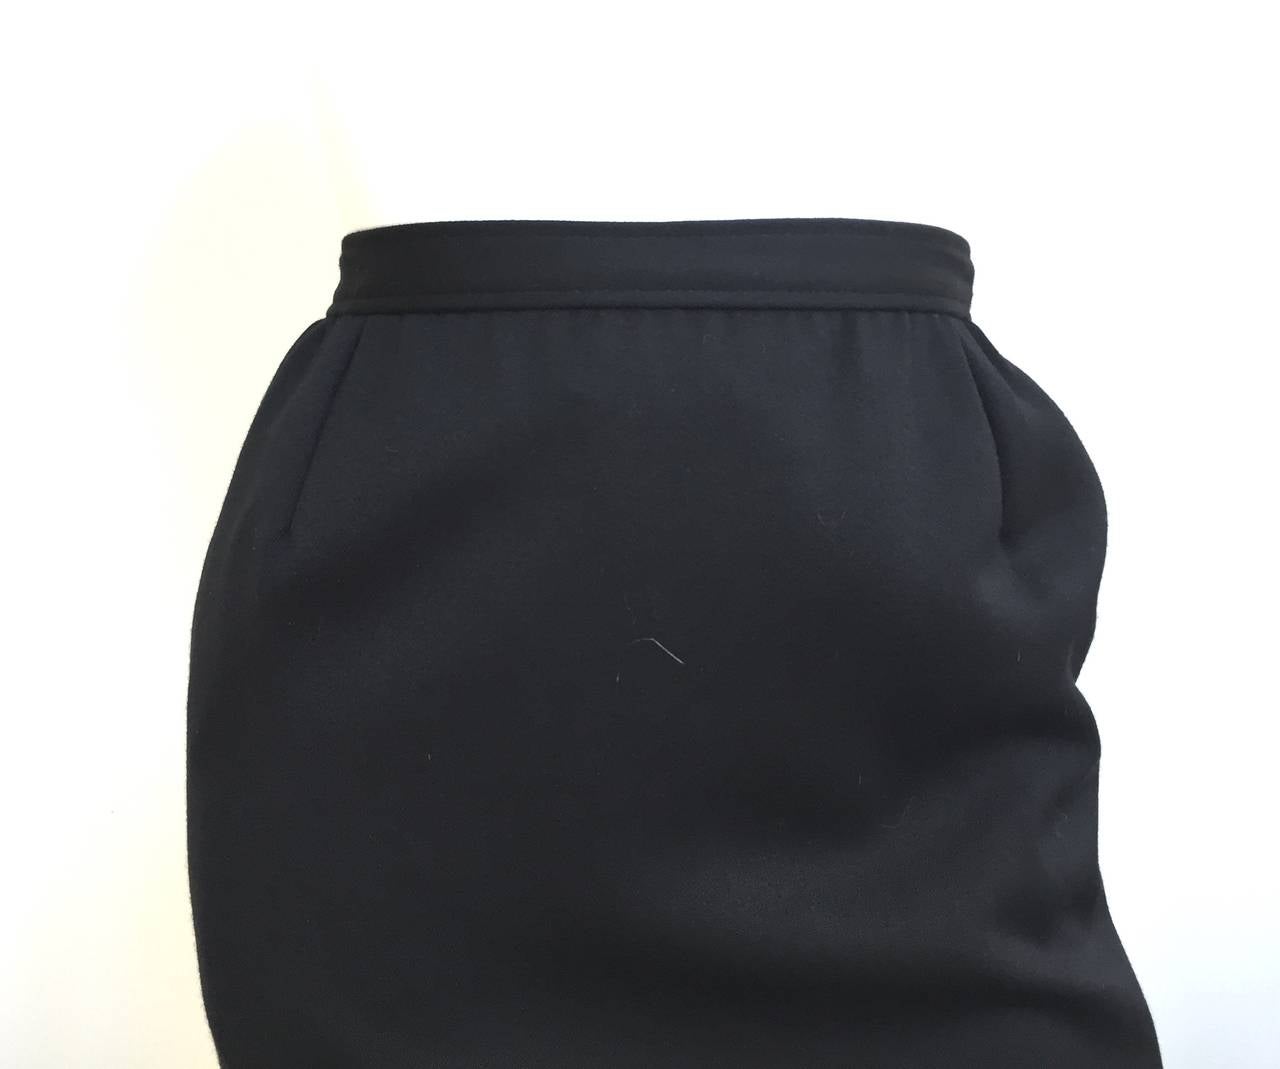 Valentino Miss V 1980s black wool wrap skirt is a vintage Italian size 44 but fits like a modern USA size 4.  Please see & use measurements below so that you can properly measure your lovely body so that Valentino would be proud. 
Velvet trim along